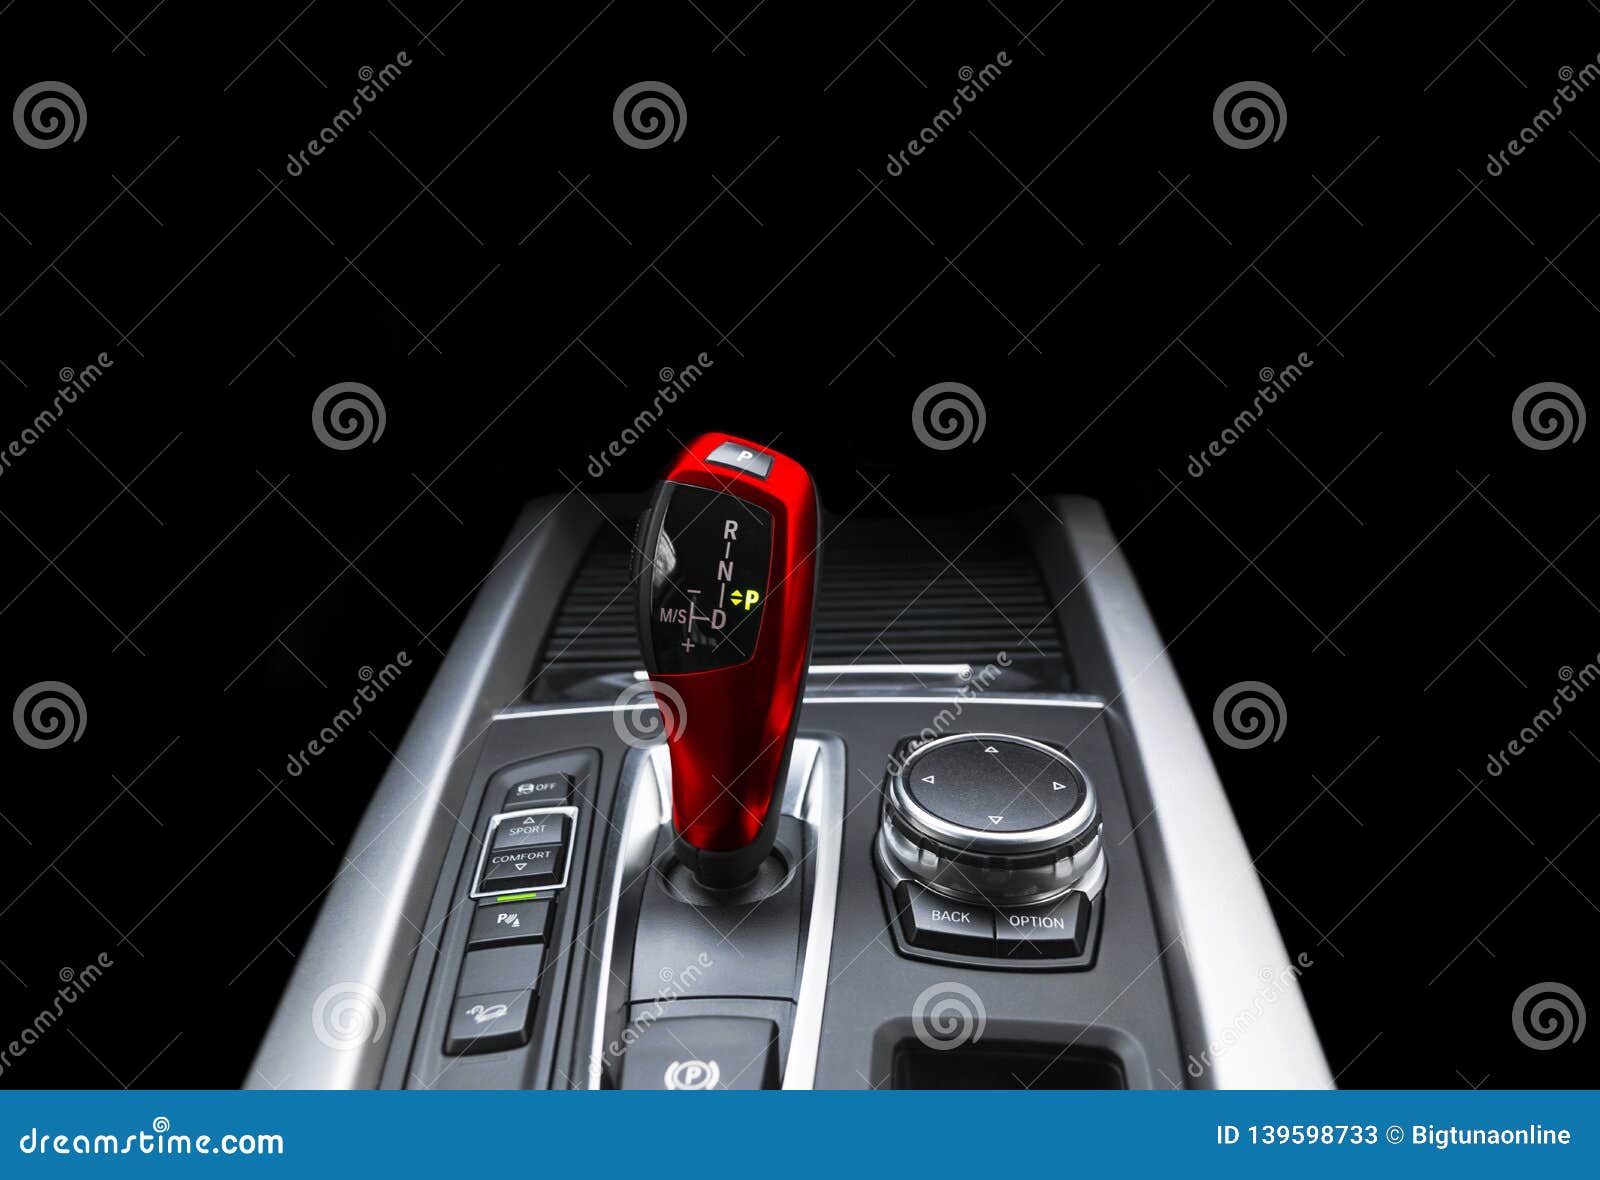 Red Automatic Gear Stick Of A Modern Car Modern Car Interior Details Close Up View Car Detailing Automatic Transmission Lever Stock Illustration Illustration Of Engine Automatic 139598733